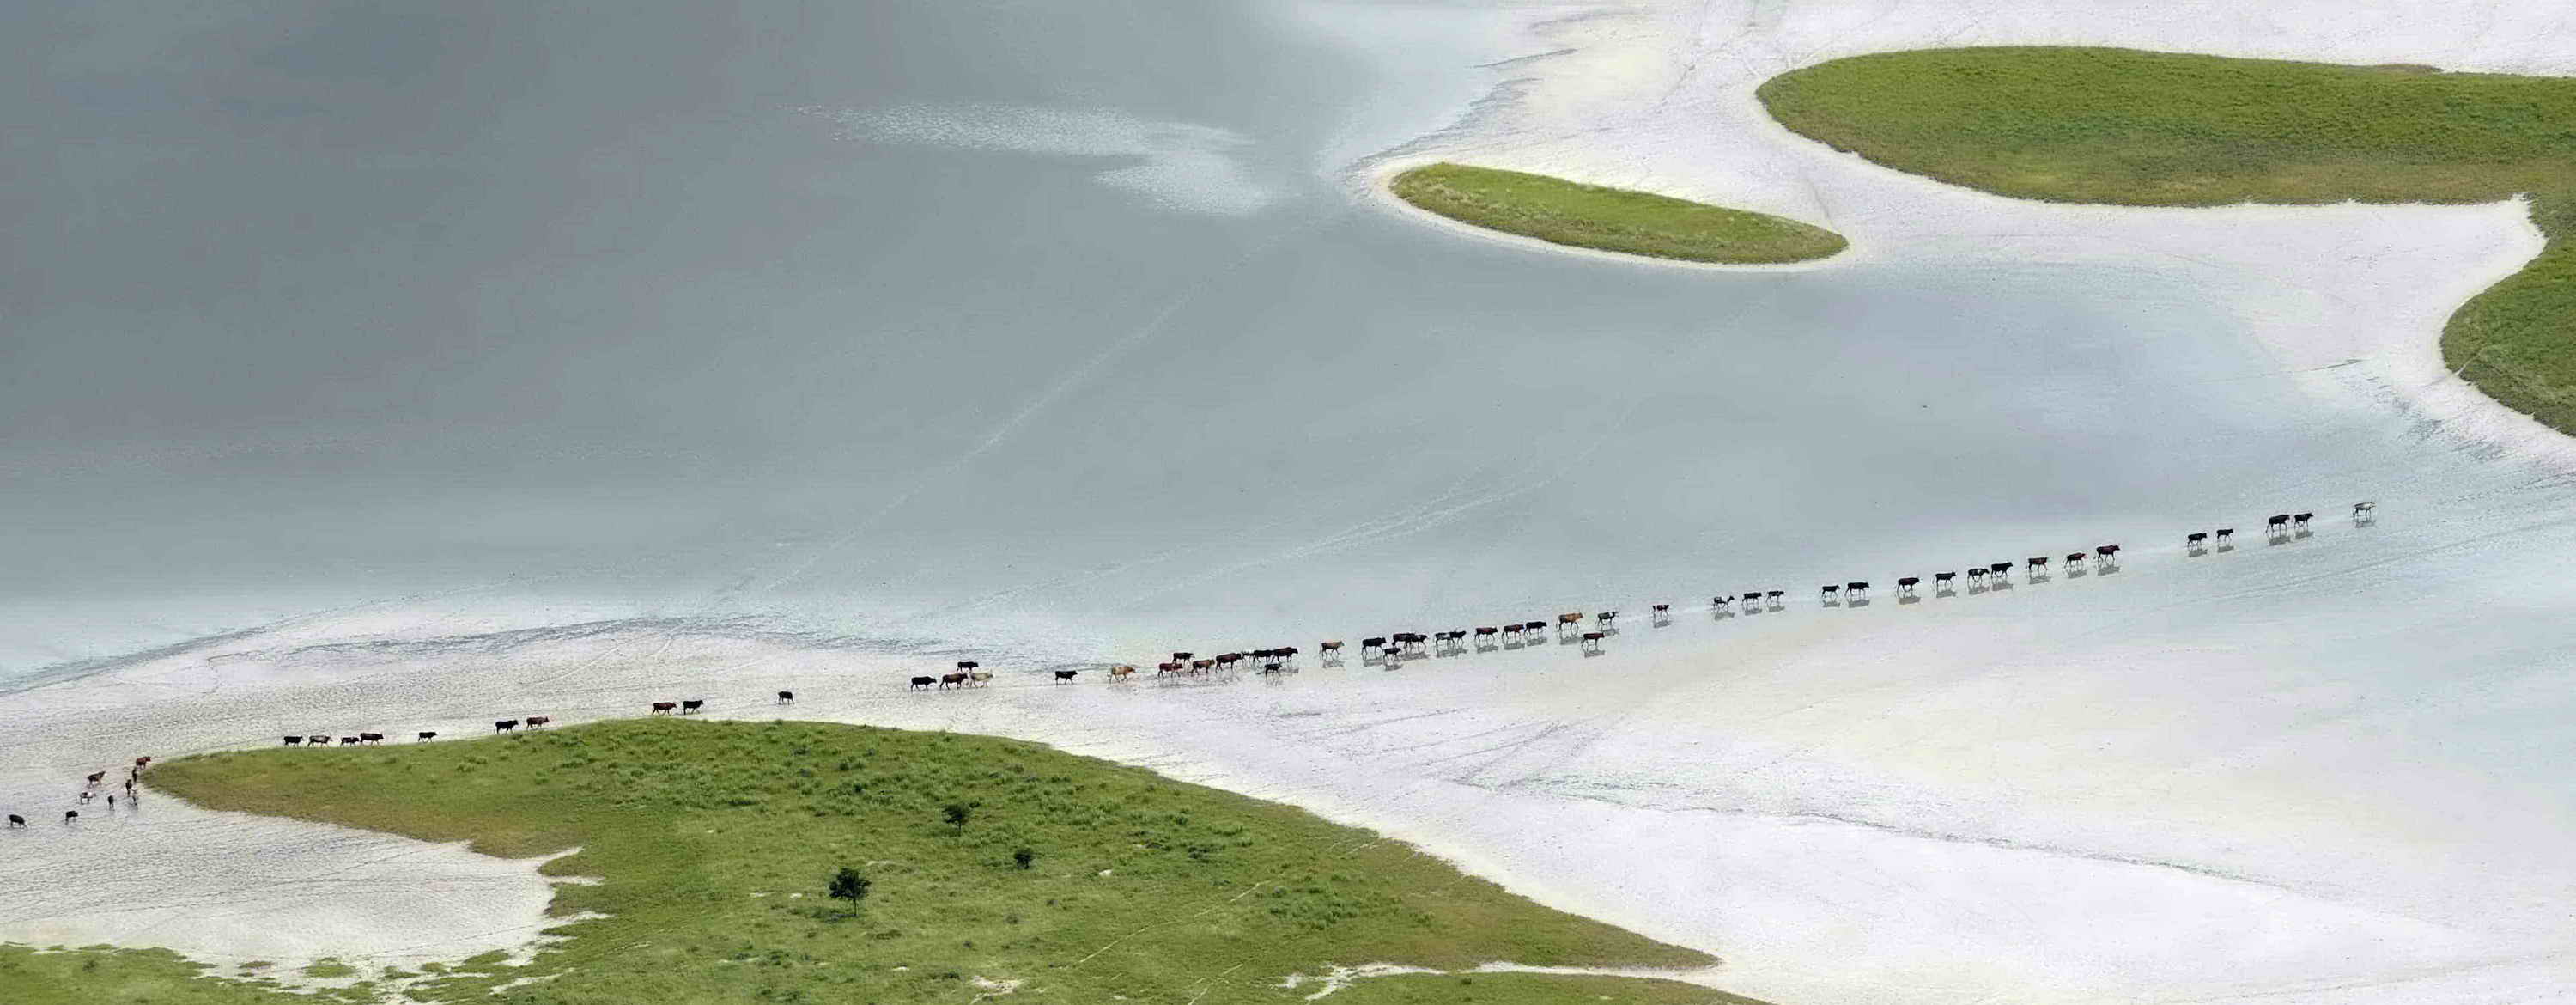 An aerial view of a long line of cattle walking across a shallow pan.